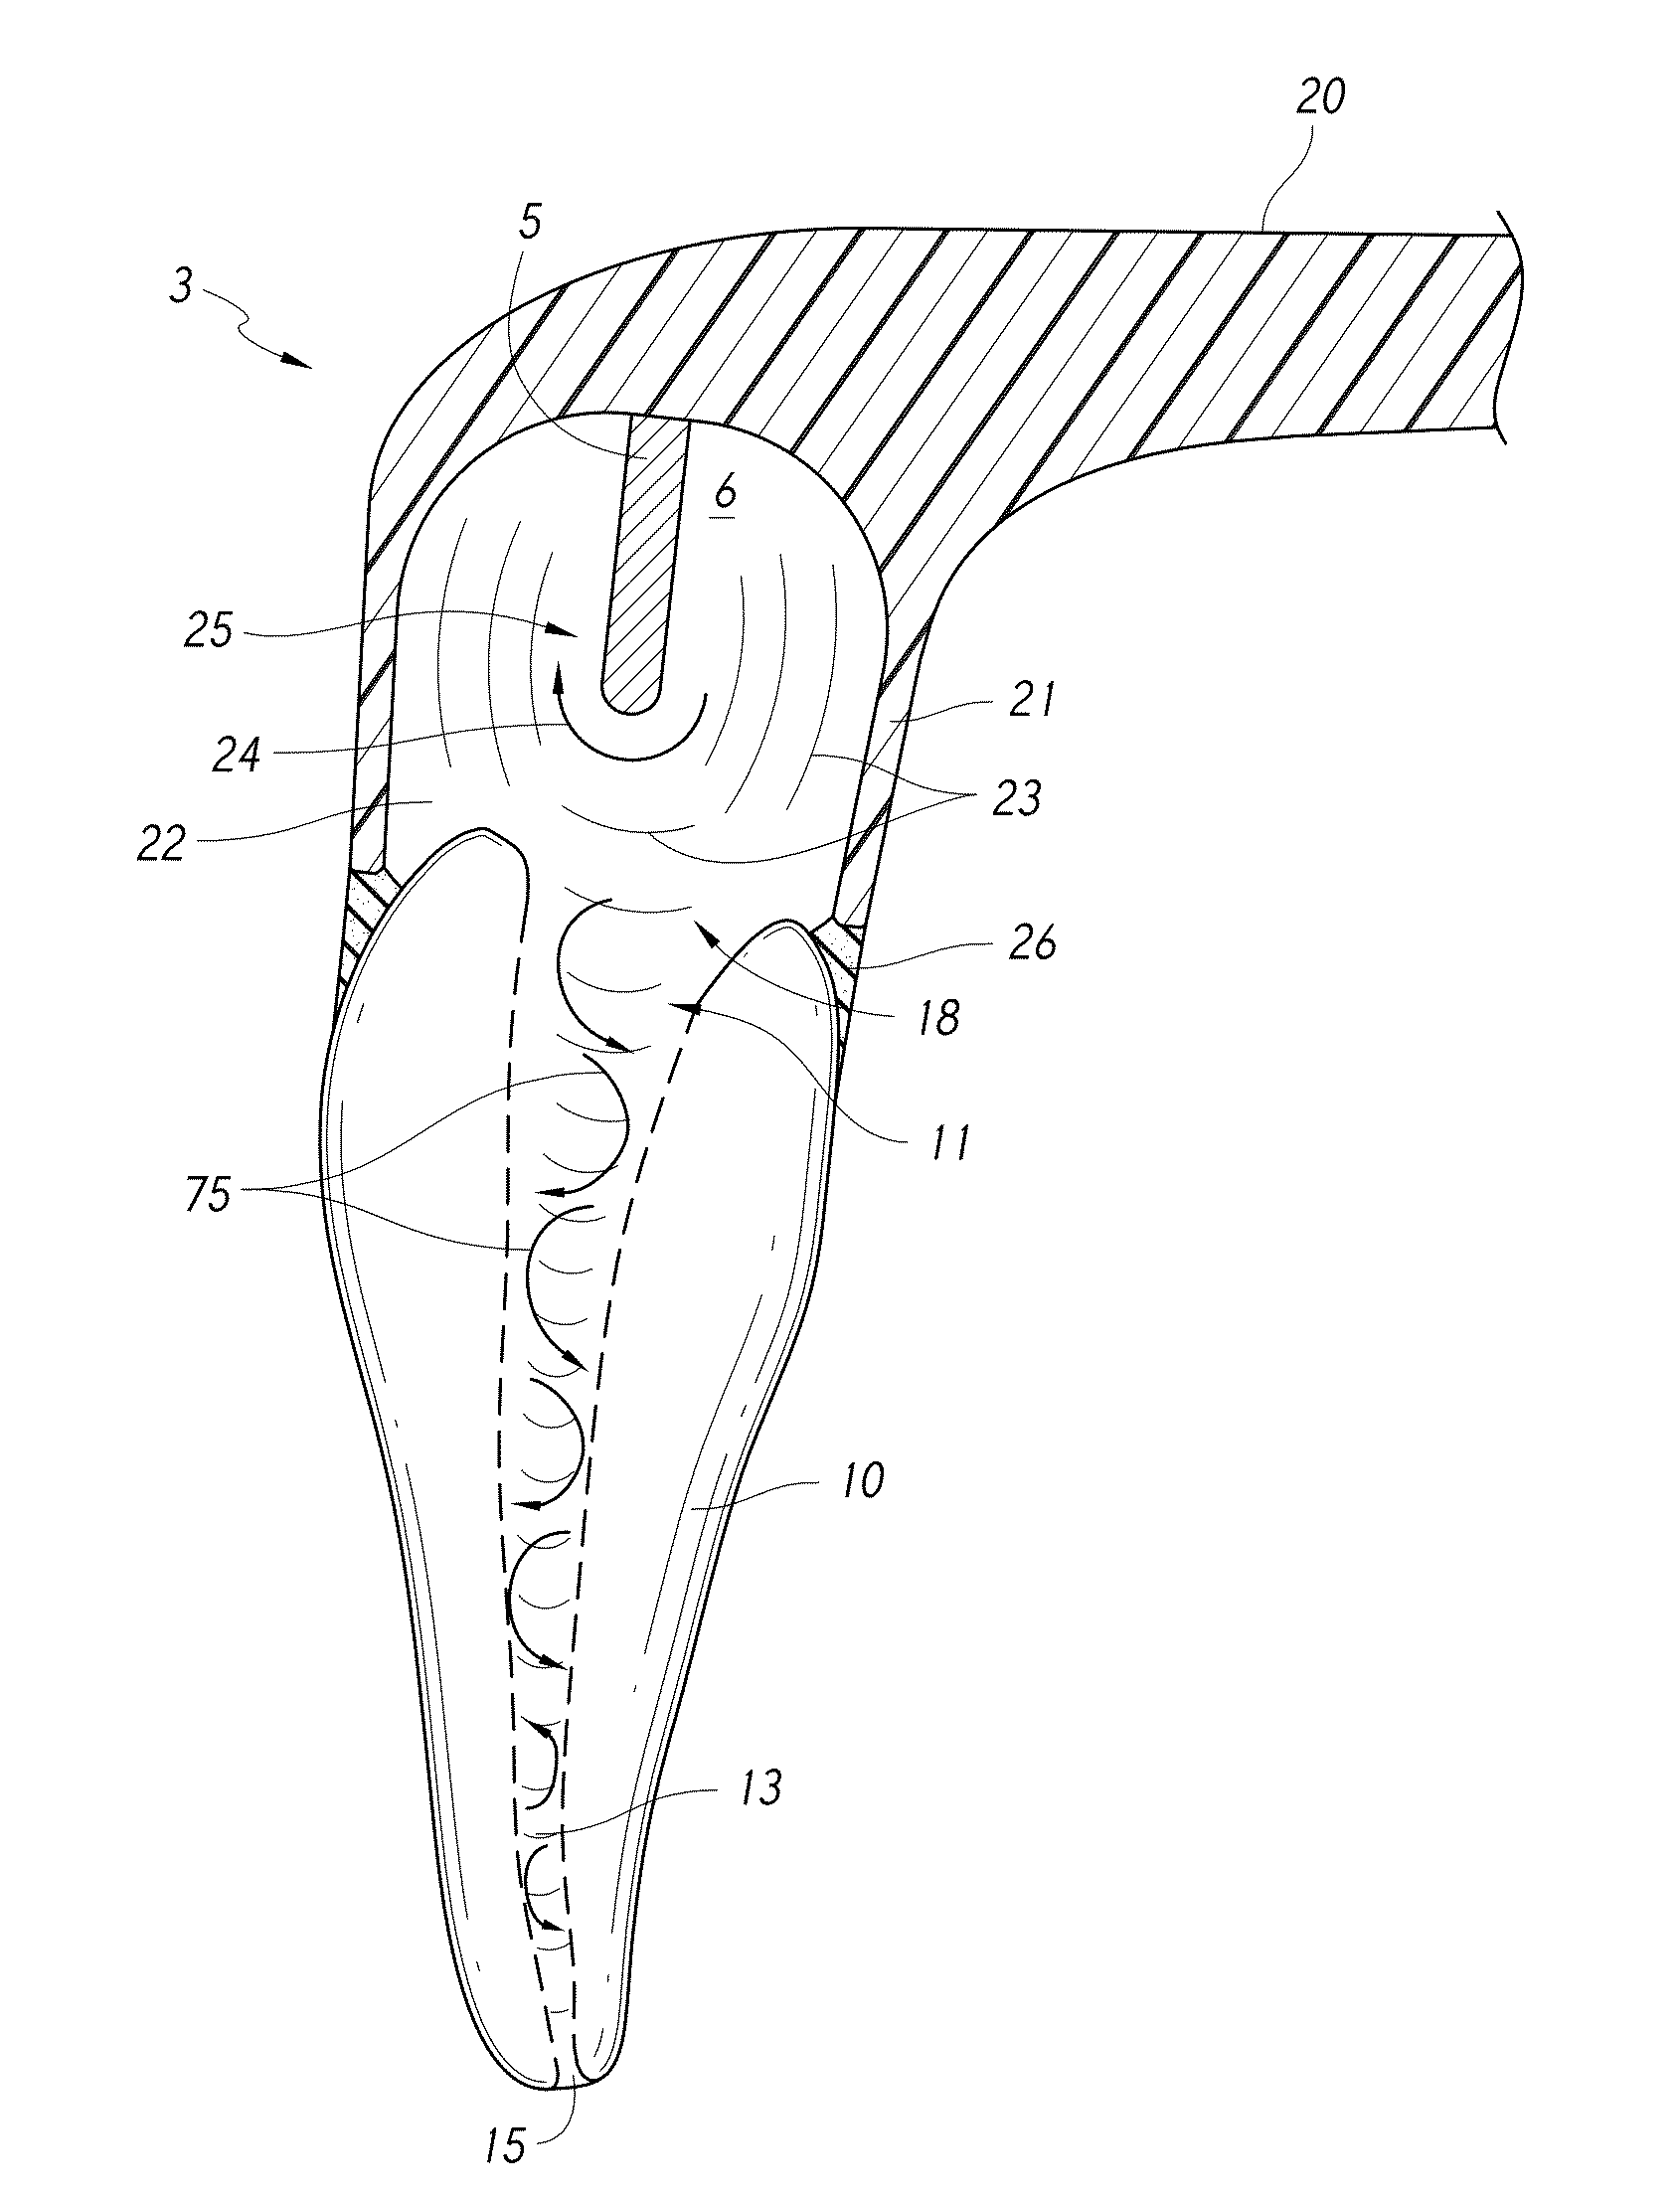 Apparatus and methods for cleaning teeth and root canals